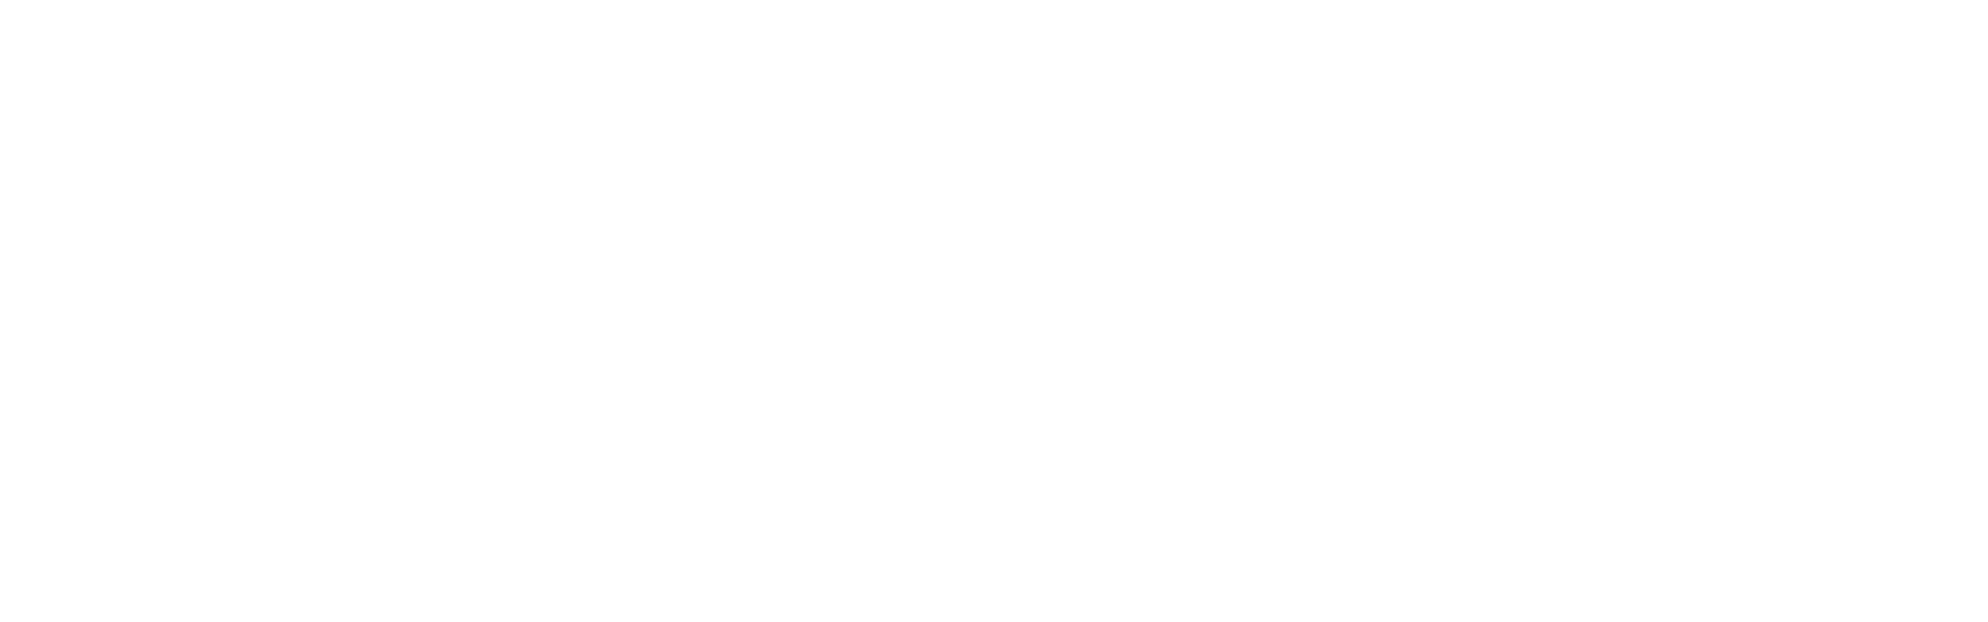 OpenFF Toolkit 0.15.2+14.g7c22c1e.dirty documentation logo